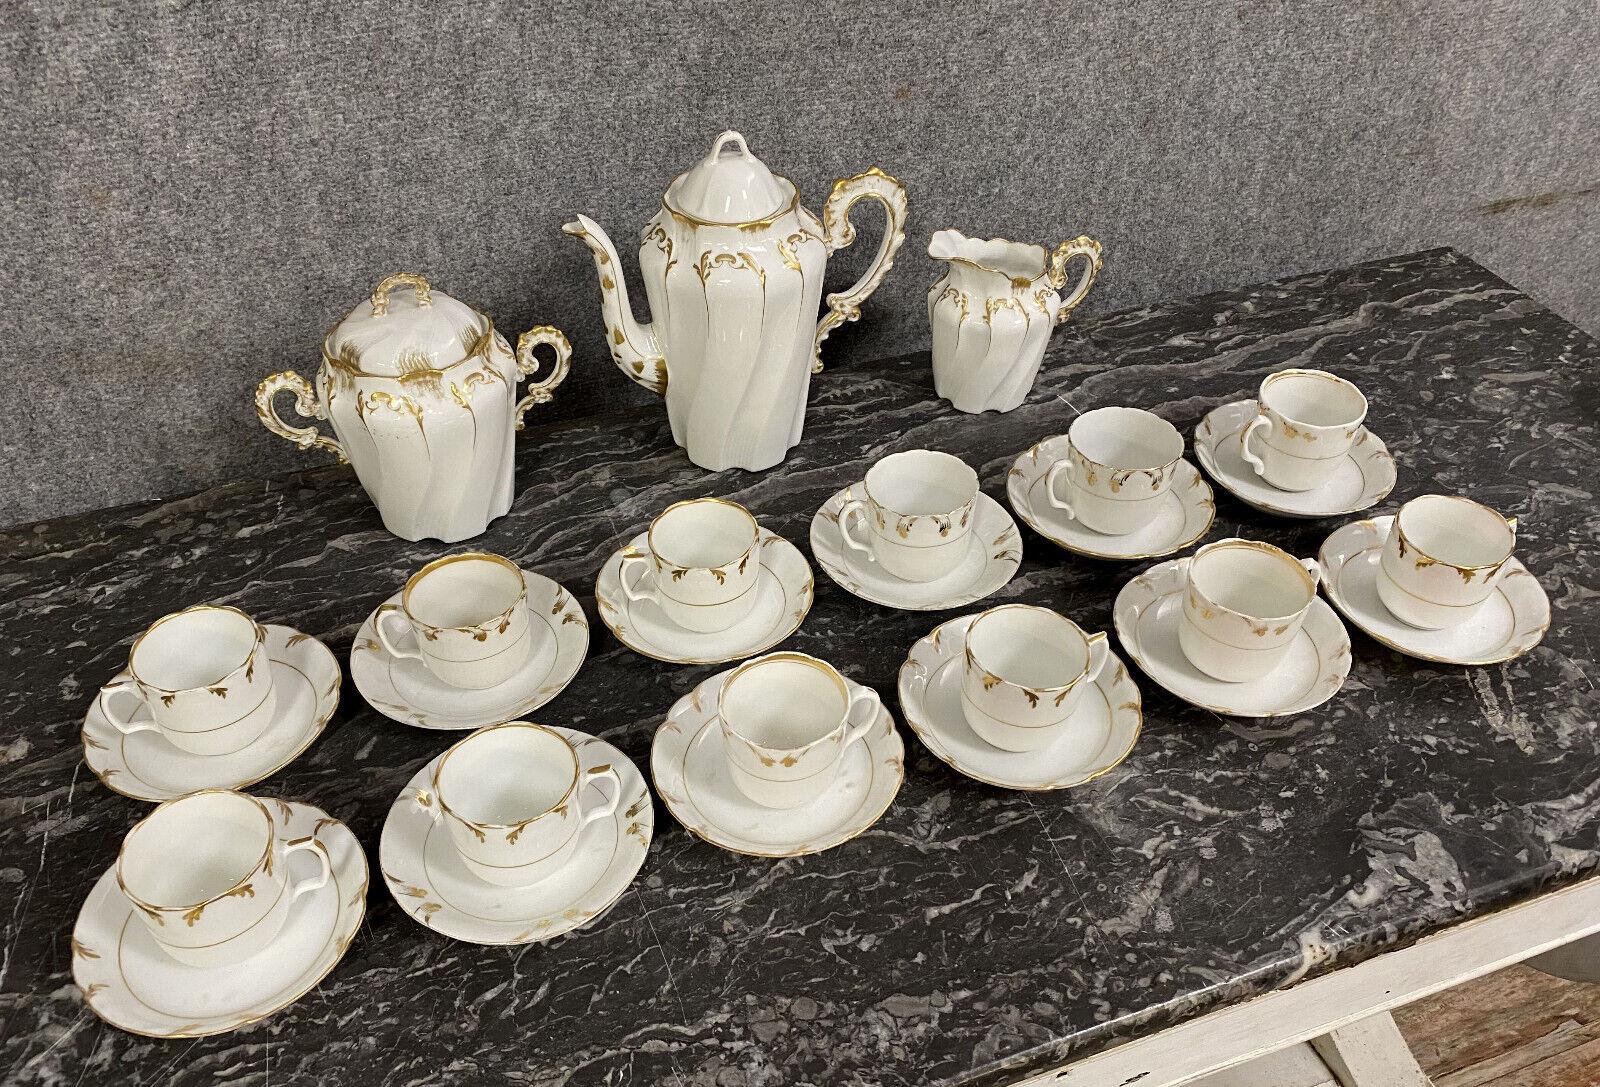 Exquisite 19th Century Lyonnaise Porcelain Coffee Service 1880s -1X43 In Good Condition For Sale In Bordeaux, FR